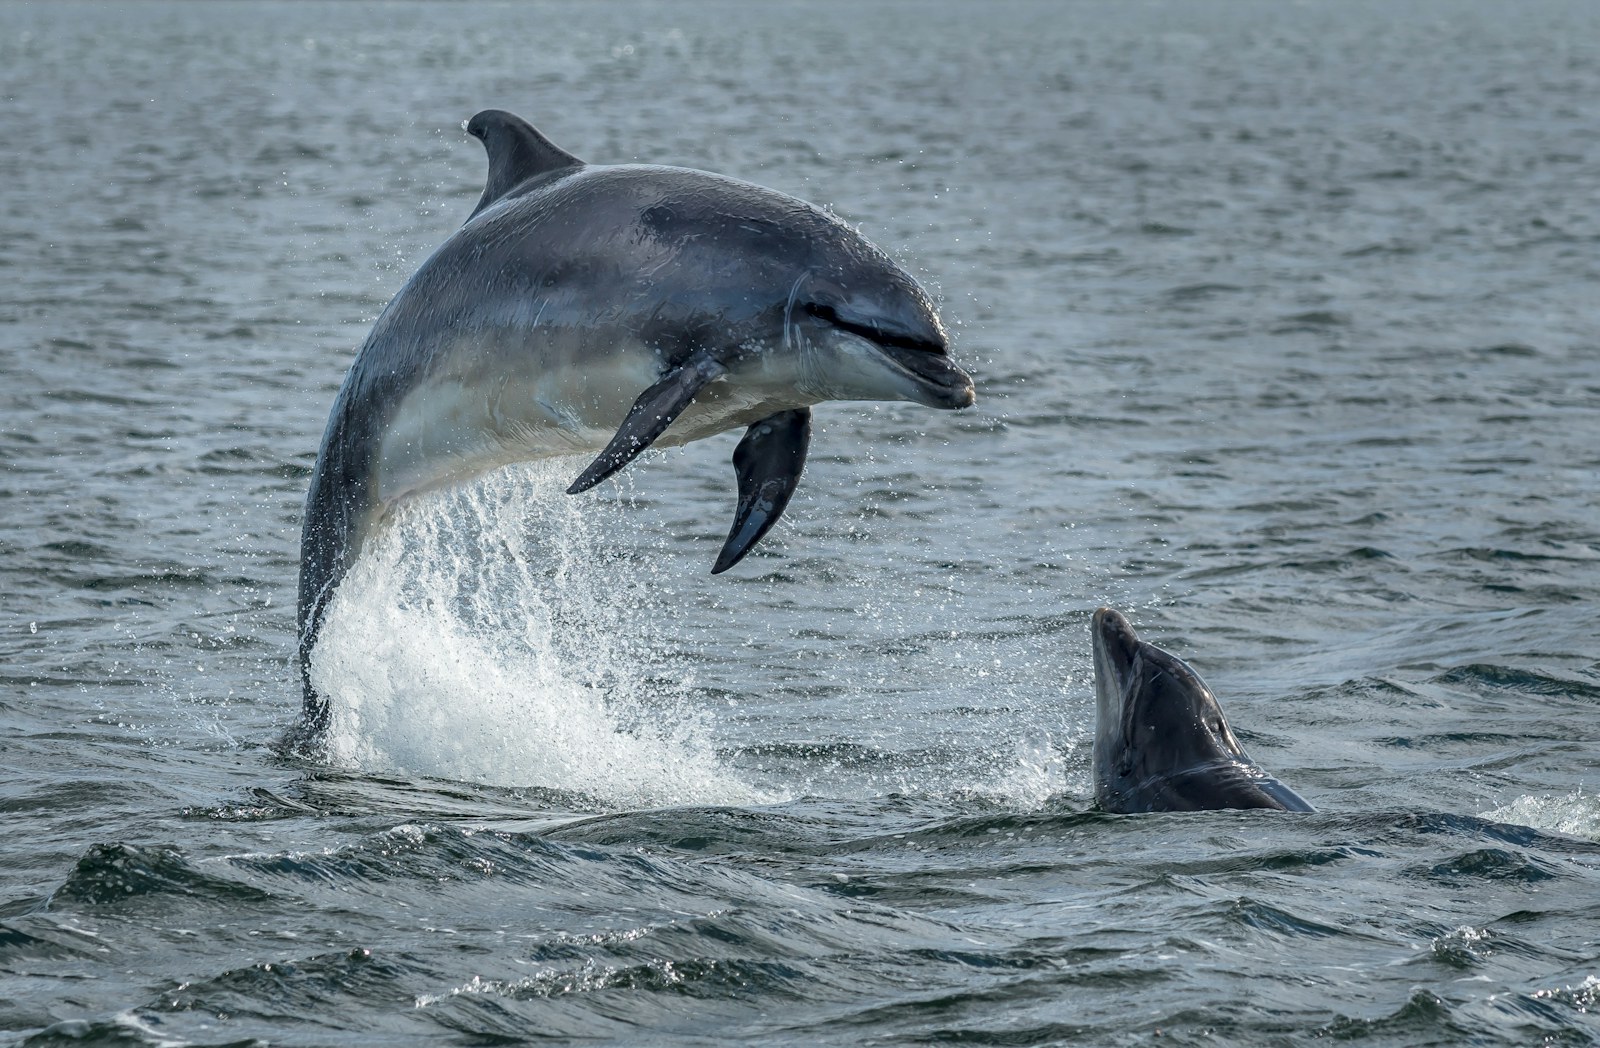 Dolphins leaping out of the ocean in the Moray Firth, near Inverness, Scotland